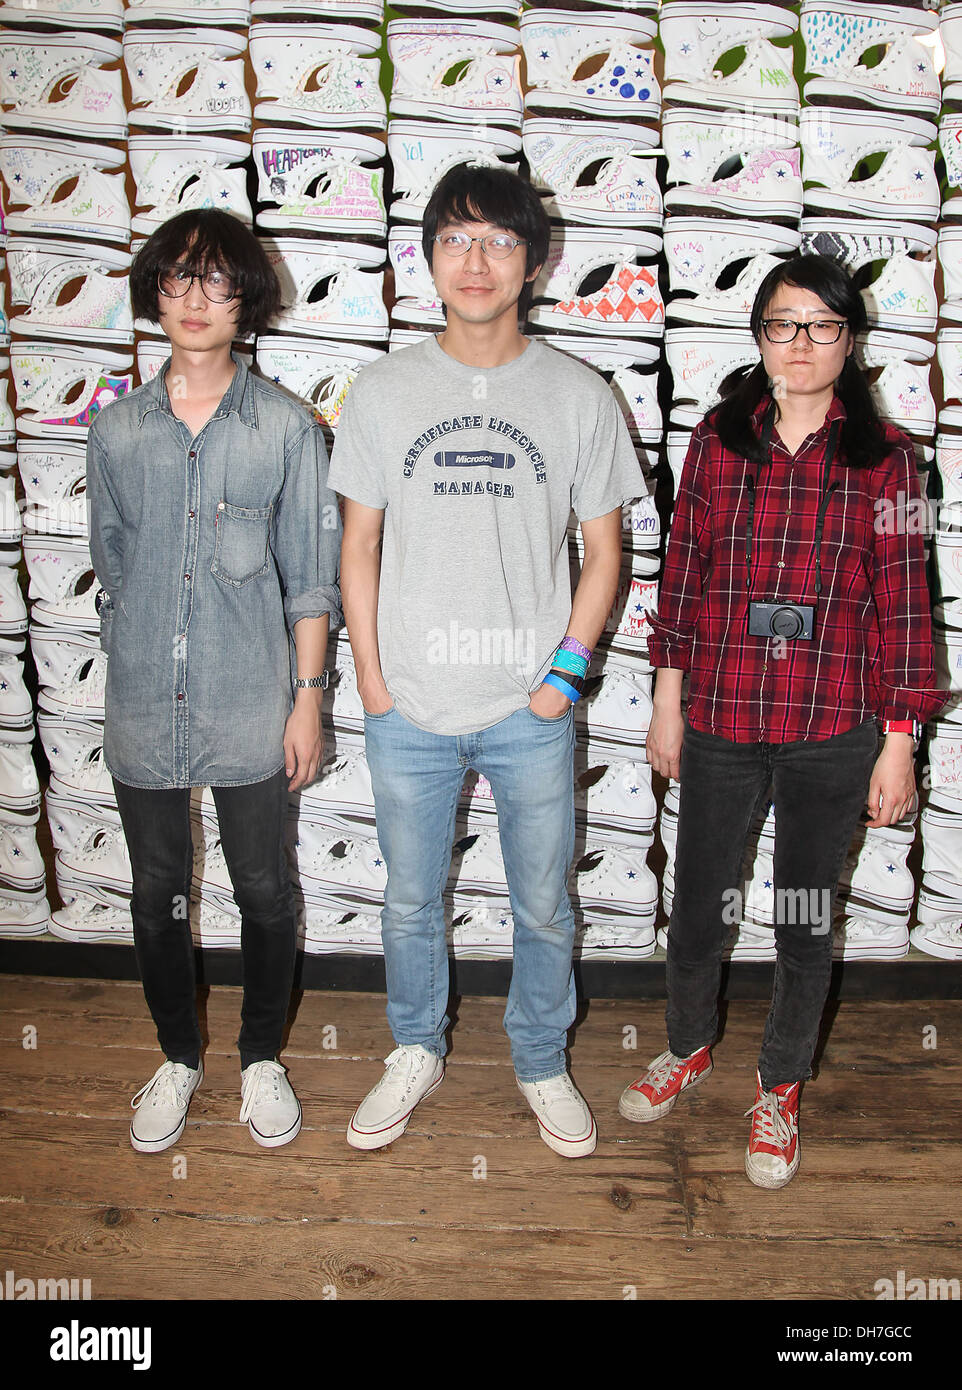 Snapline FADER FORT Presented by CONVERSE at South by Southwest Festival  (SXSW) Austin Texas - 16.03.12 Stock Photo - Alamy